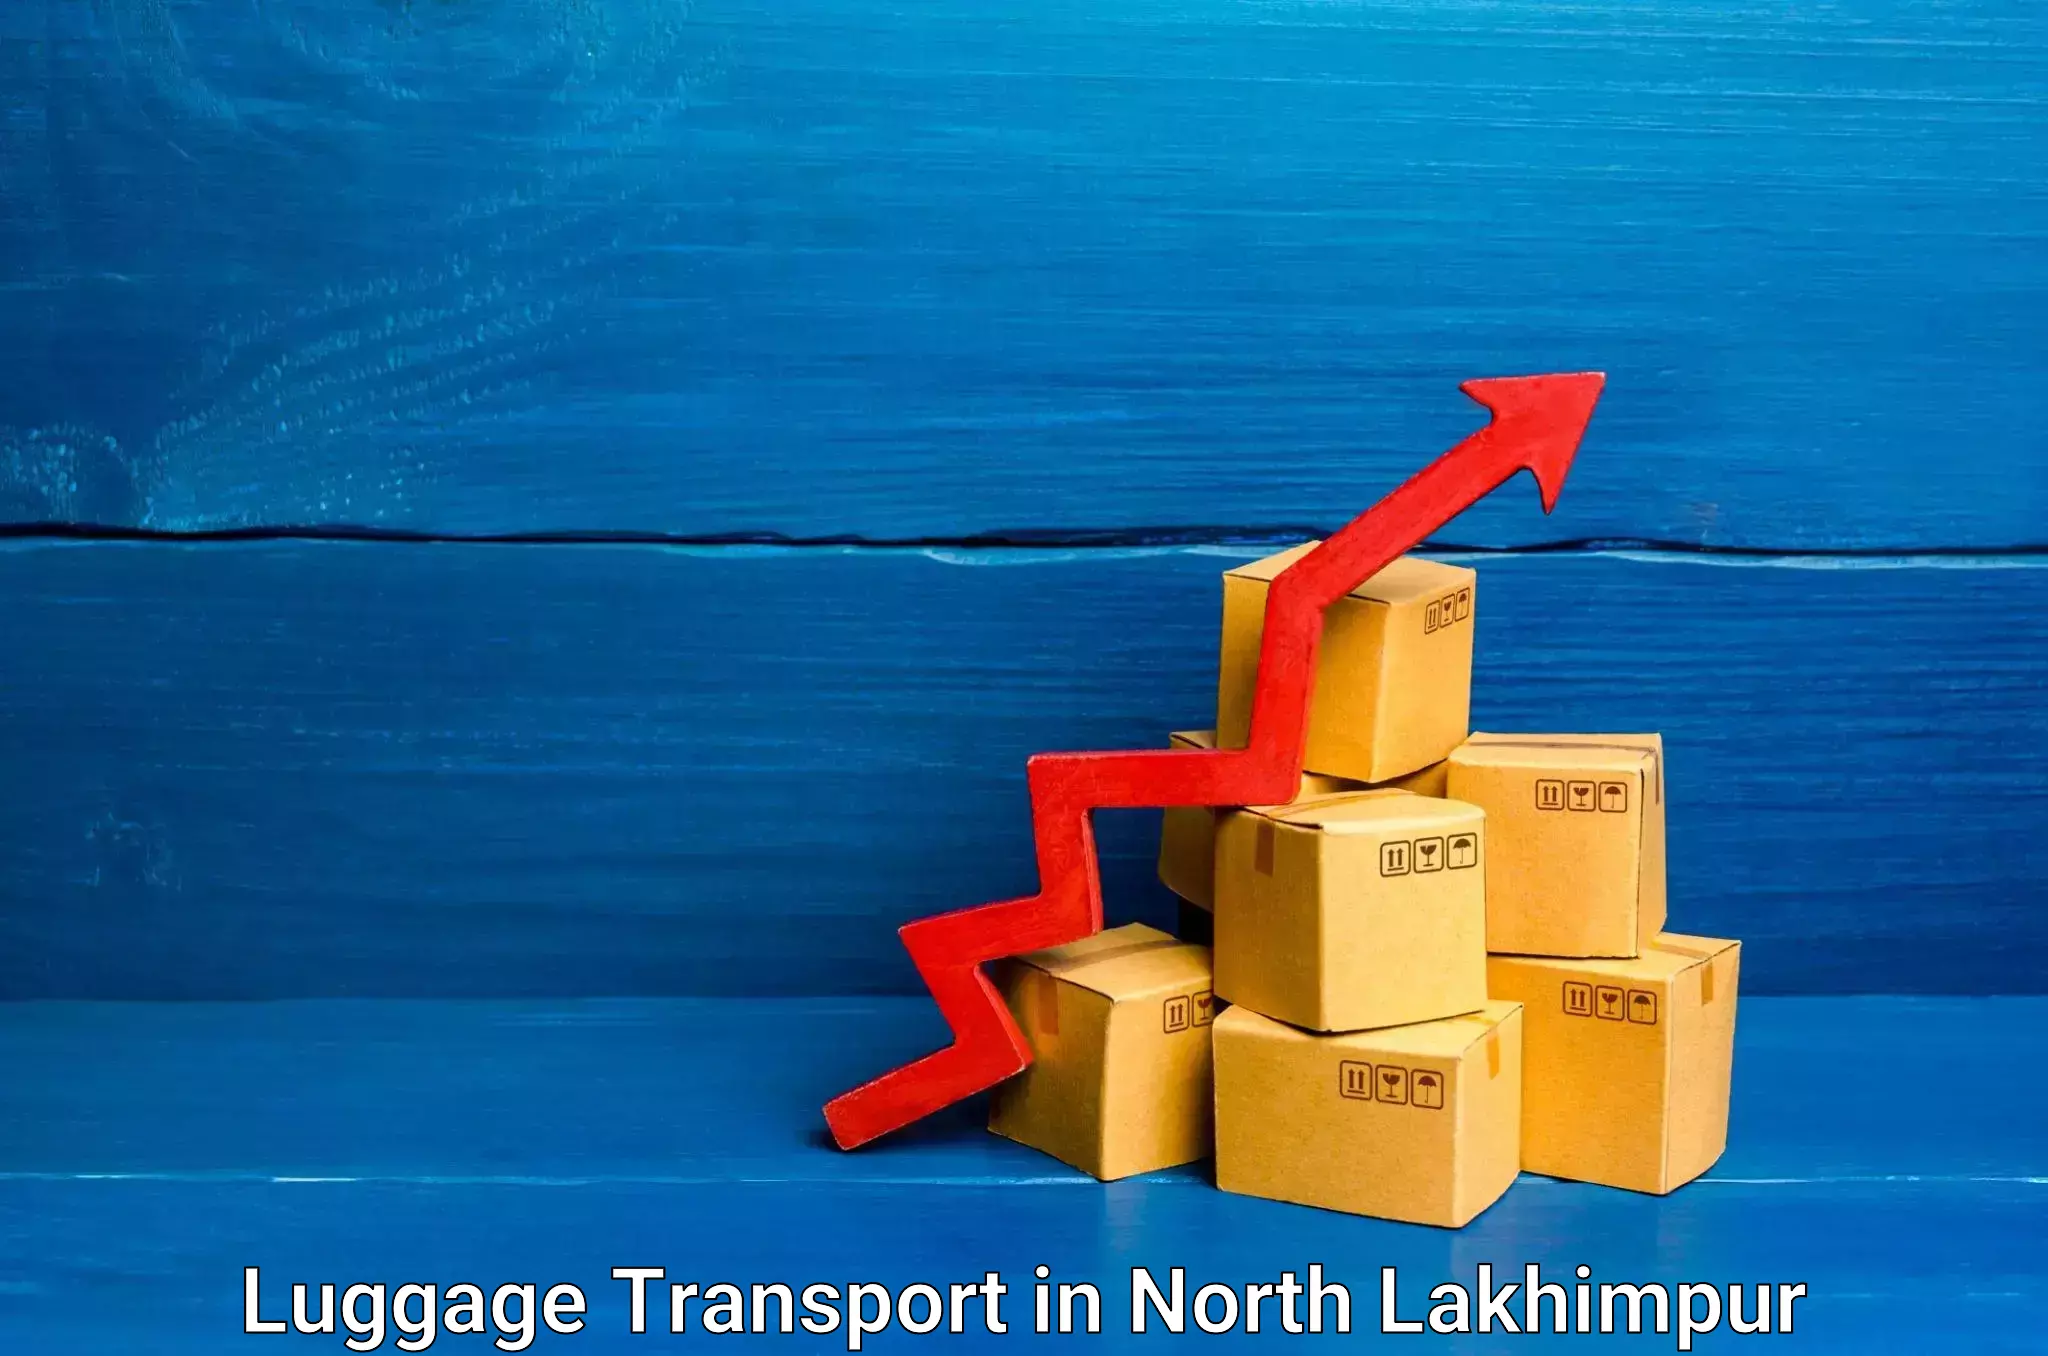 Baggage shipping experience in North Lakhimpur